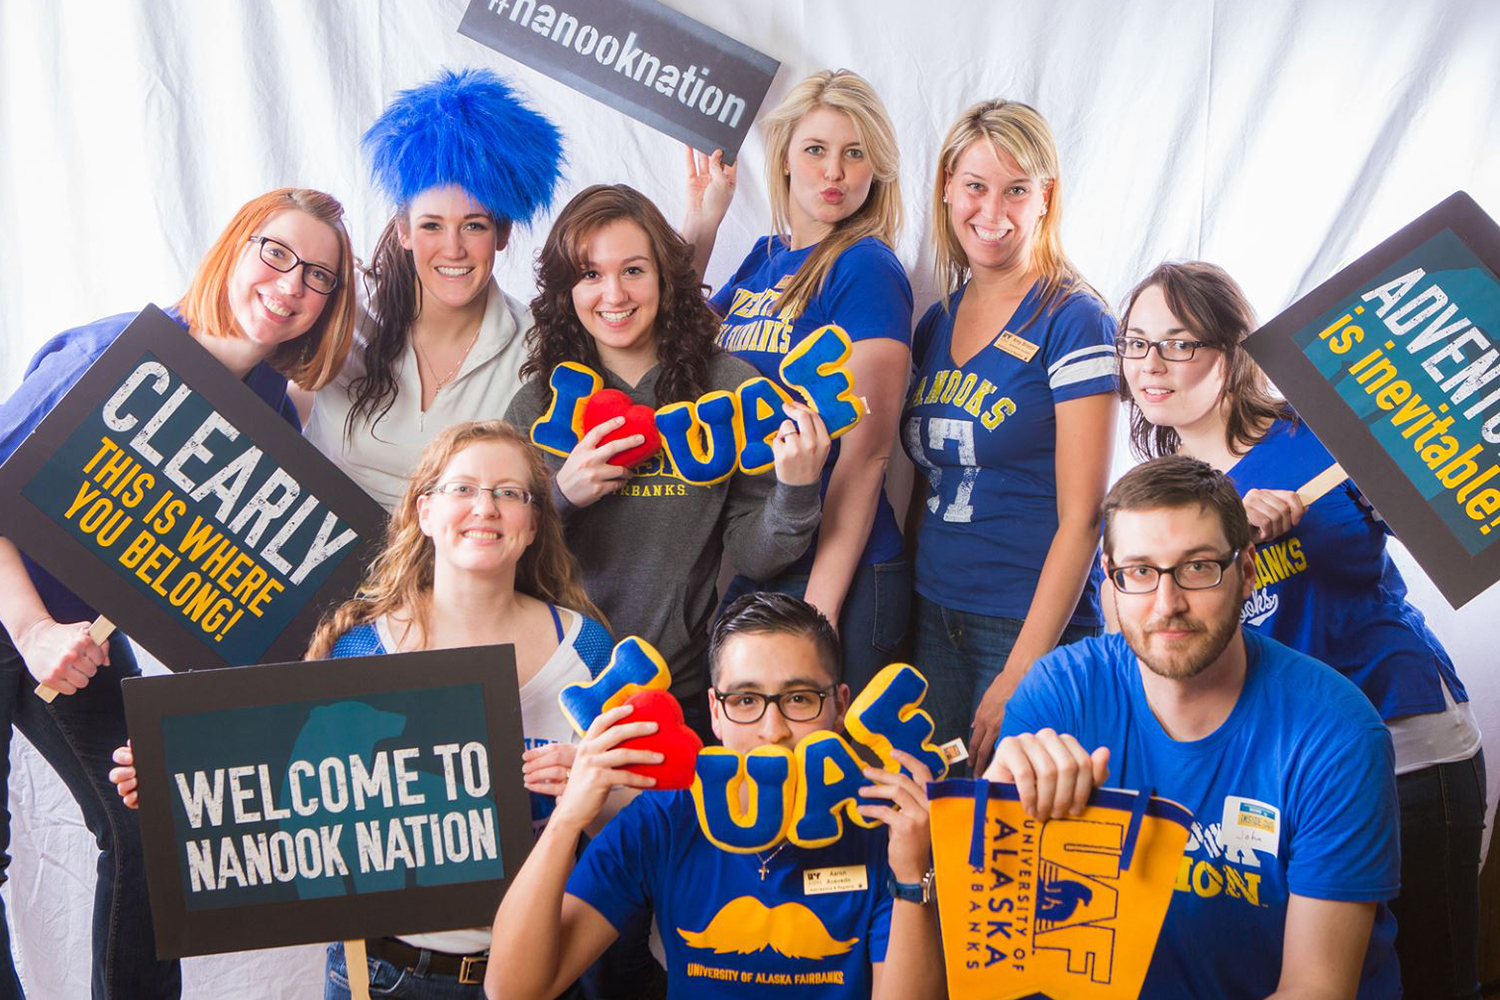 Orientation leaders pose in their UAF gear holding props and signs welcoming new students